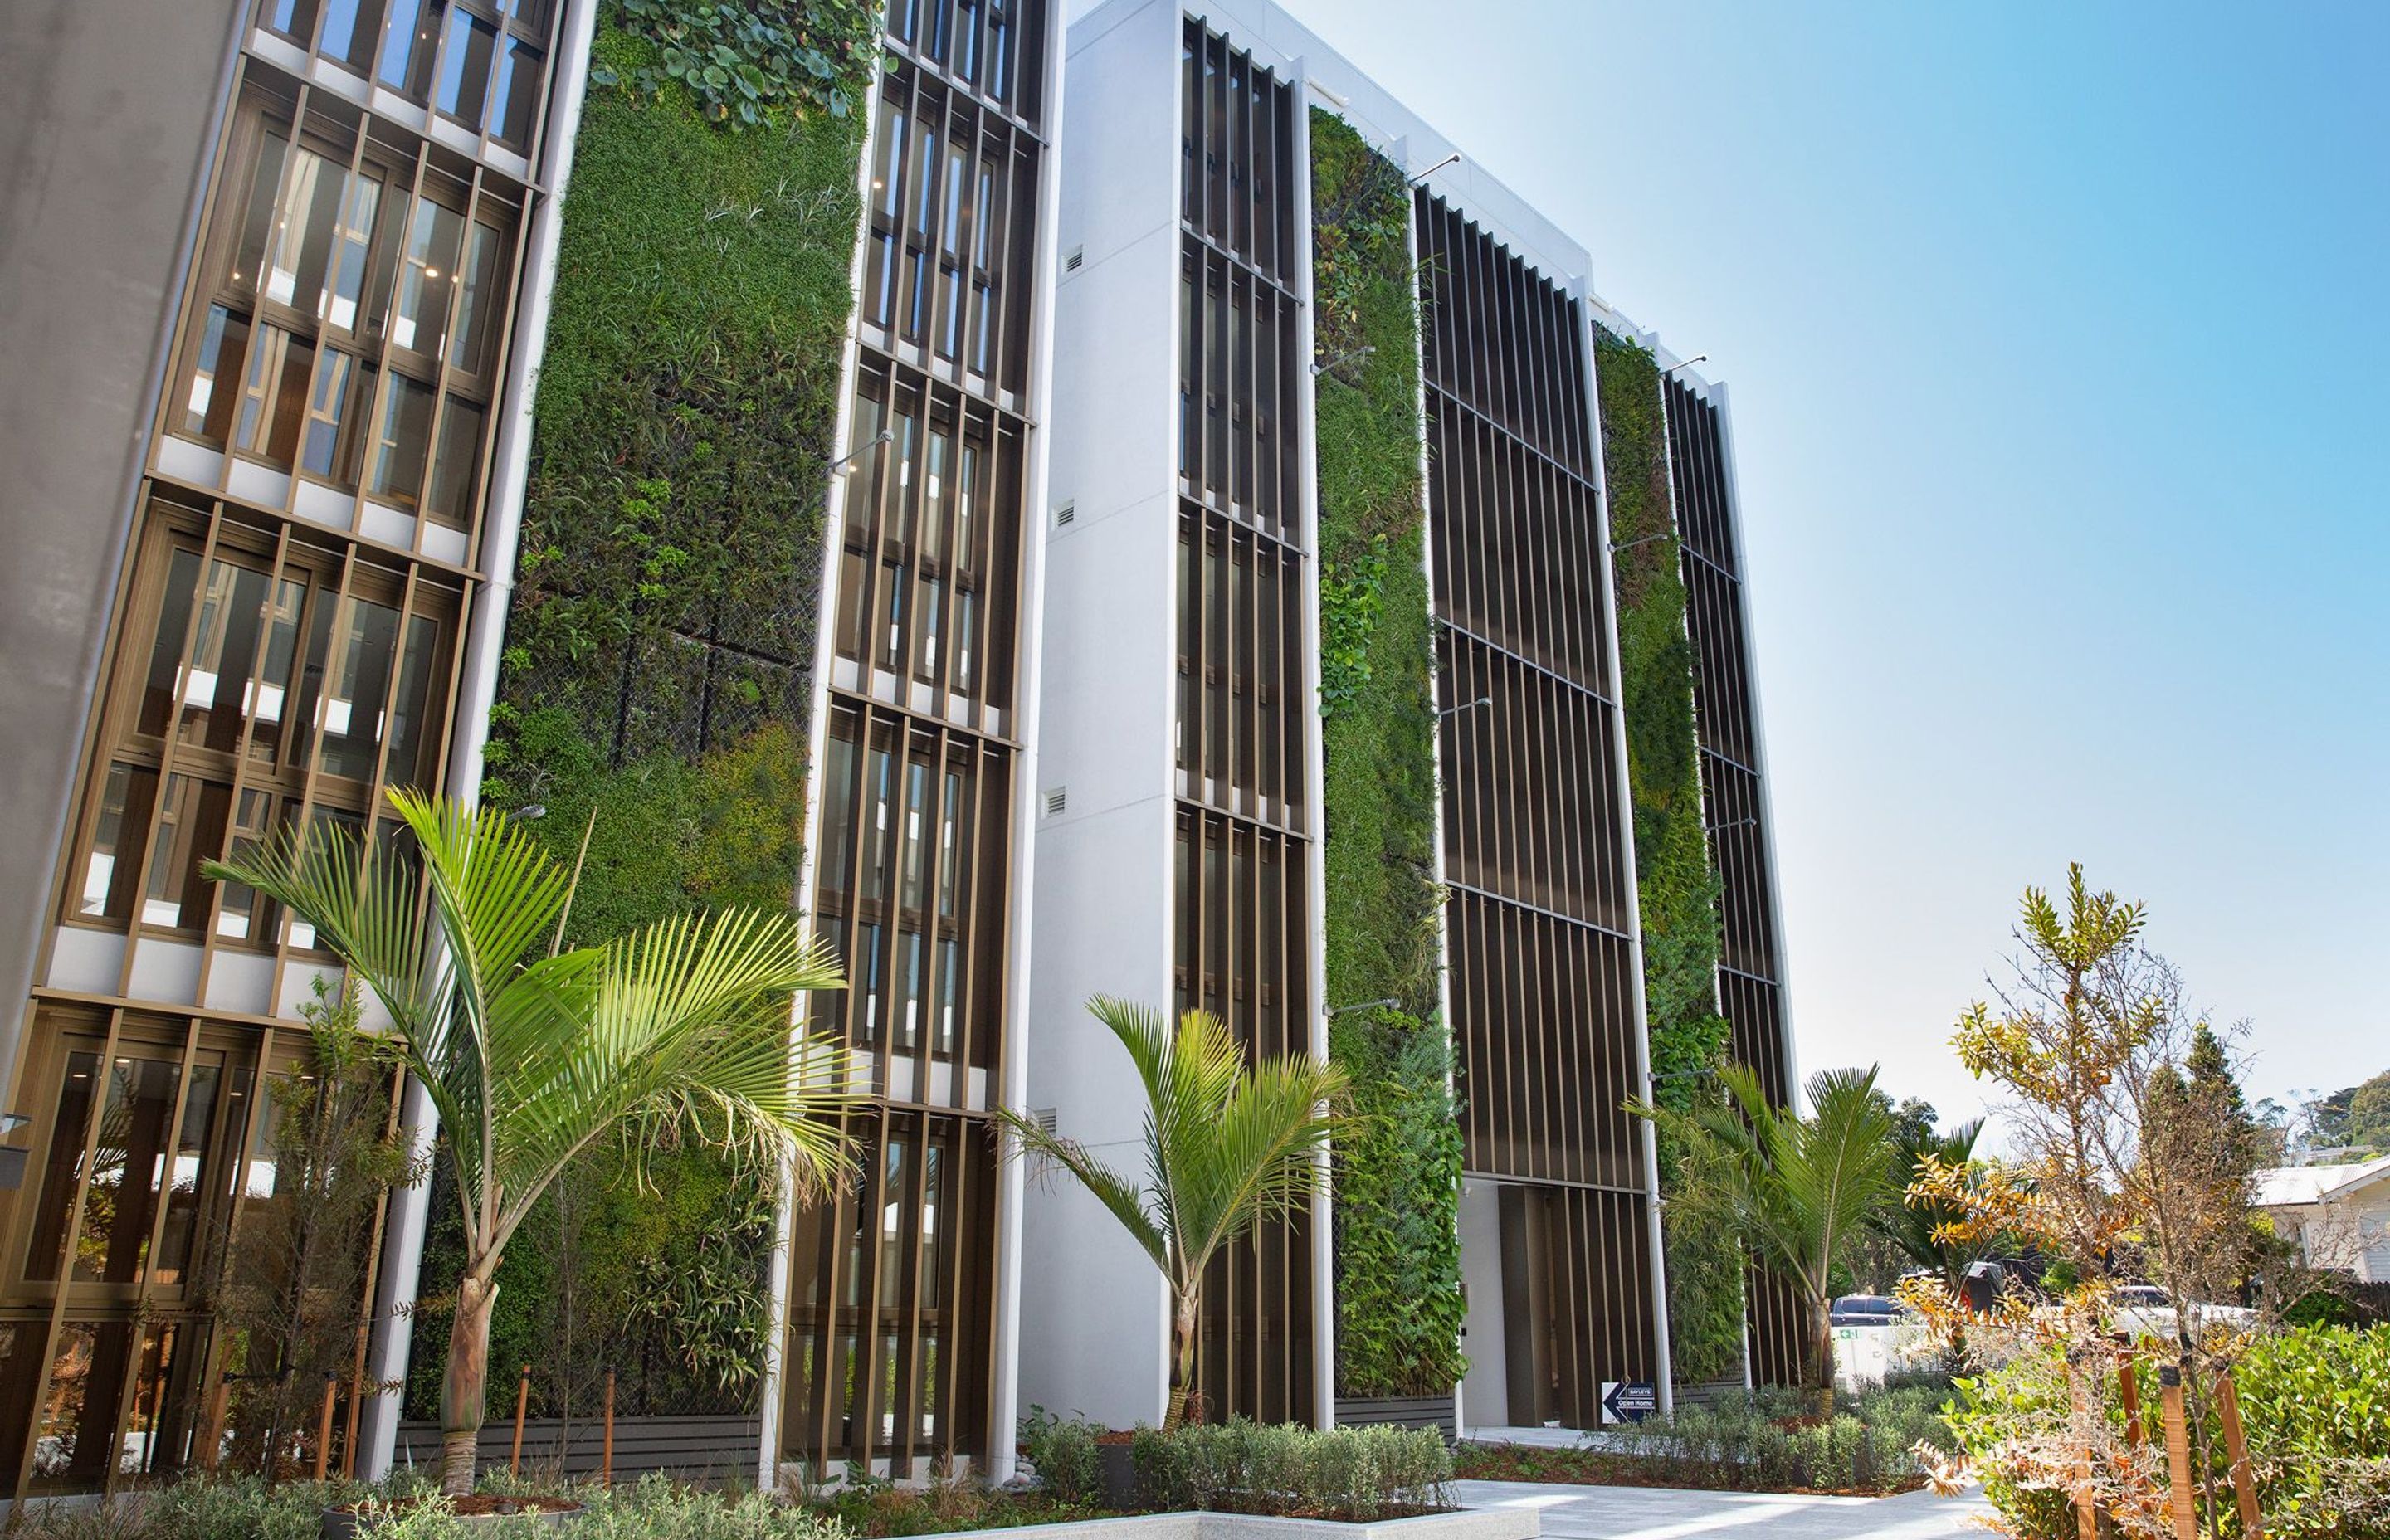 The green walls on St Mark’s Apartment building in Remuera earned the project the first-ever NZ Green Building Council residential green points for 'green' and covers a combined area of more than 110m² with more than 5000, mainly native, plants.